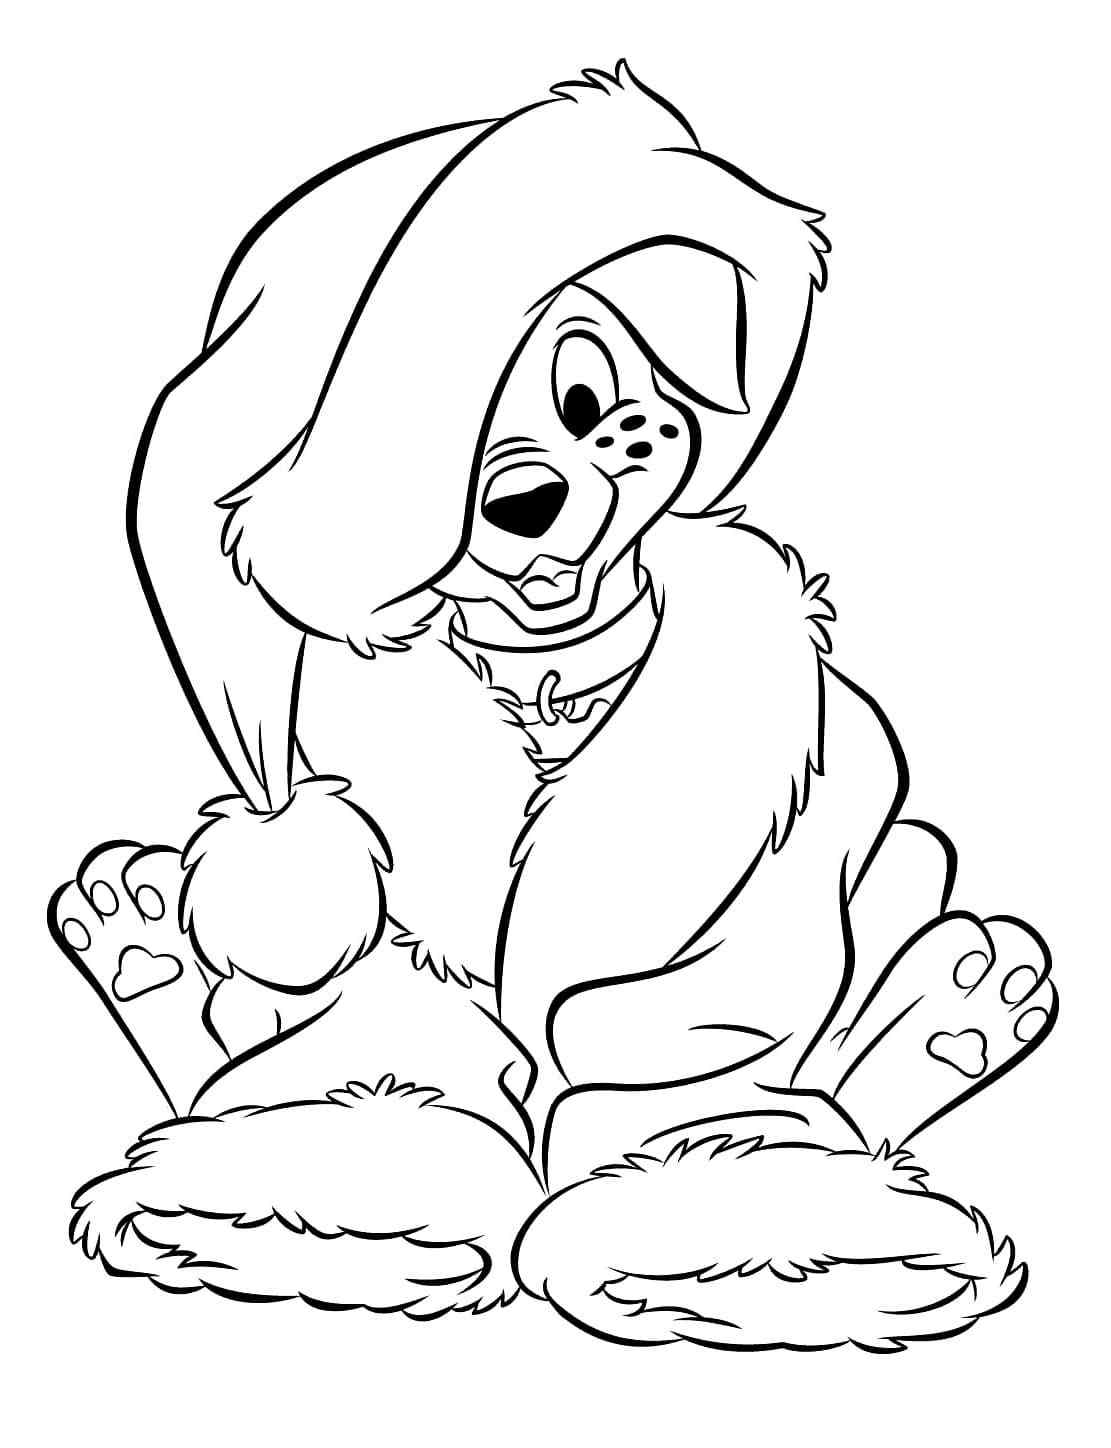 It Seems That Santa’s Suit is Too Big Coloring Page